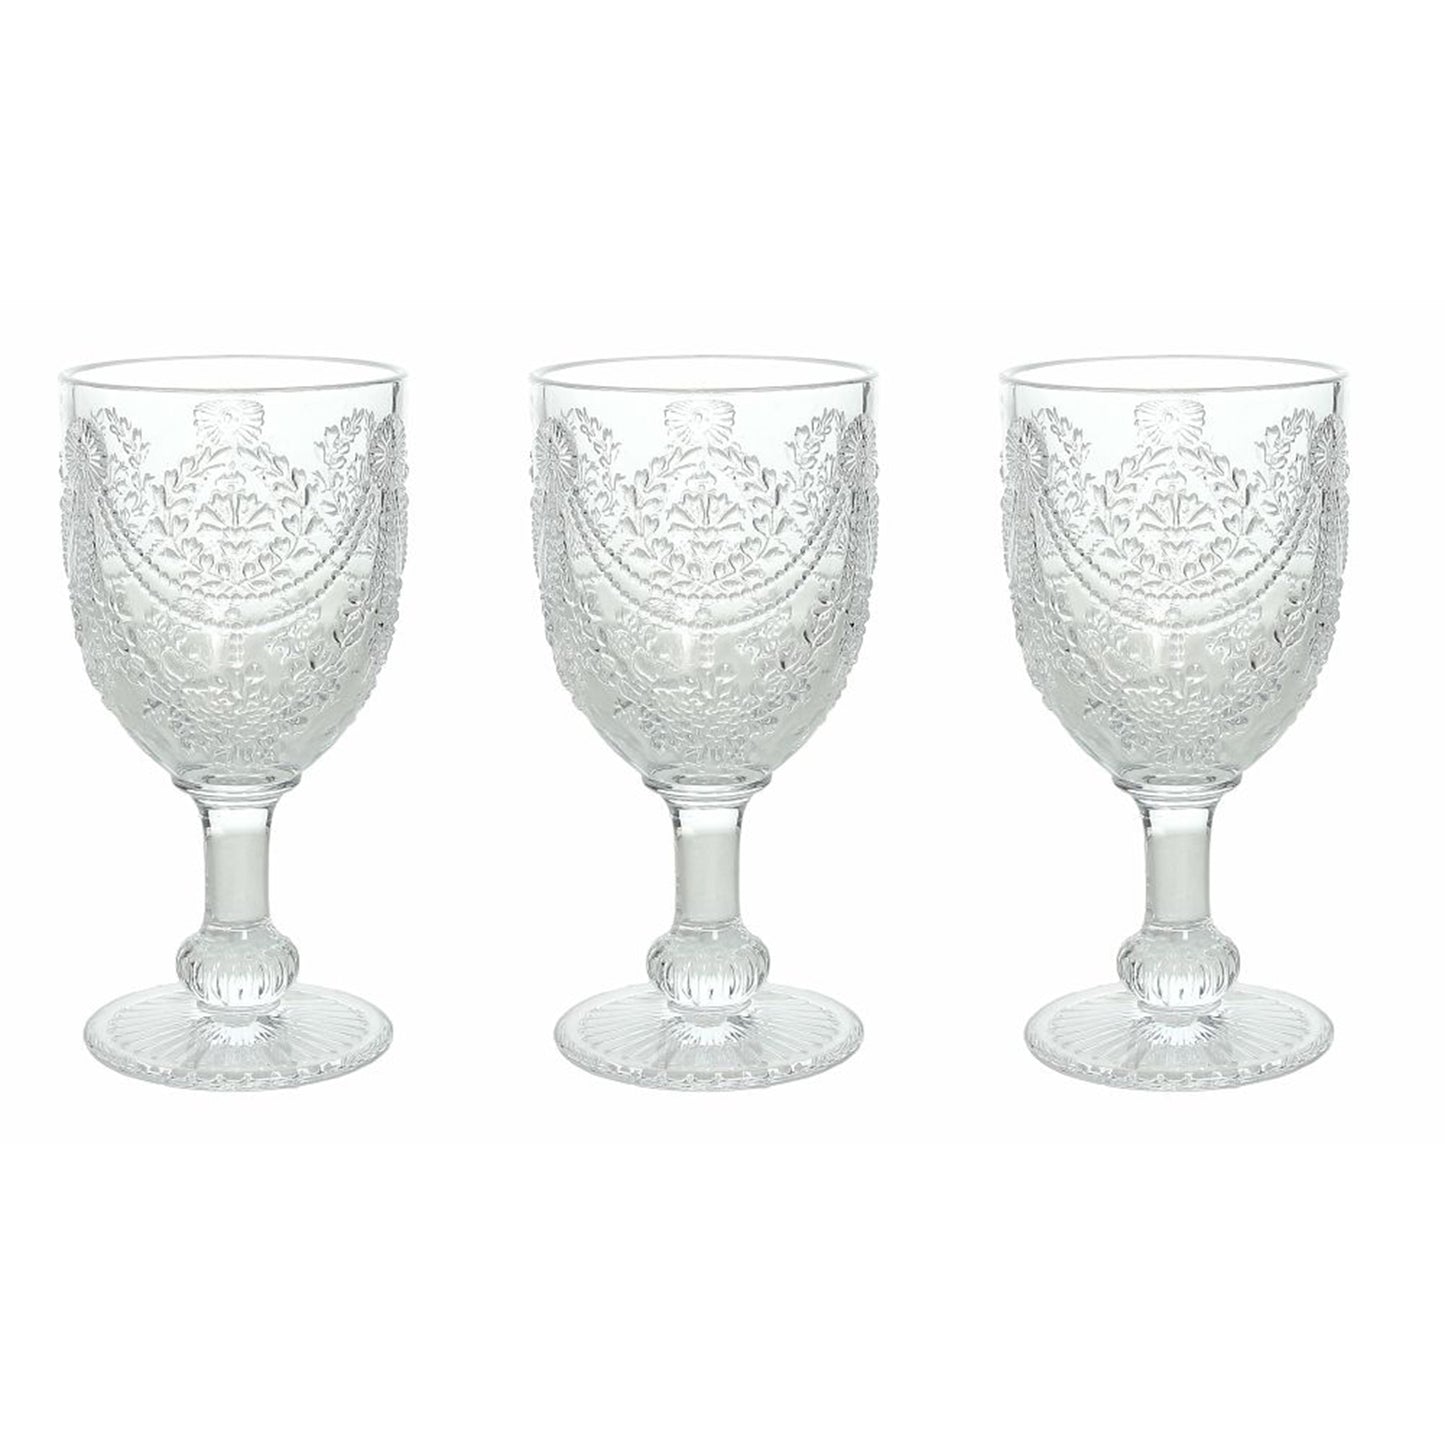 Tognana by Widgeteer Savoia Goblets, Set of 3